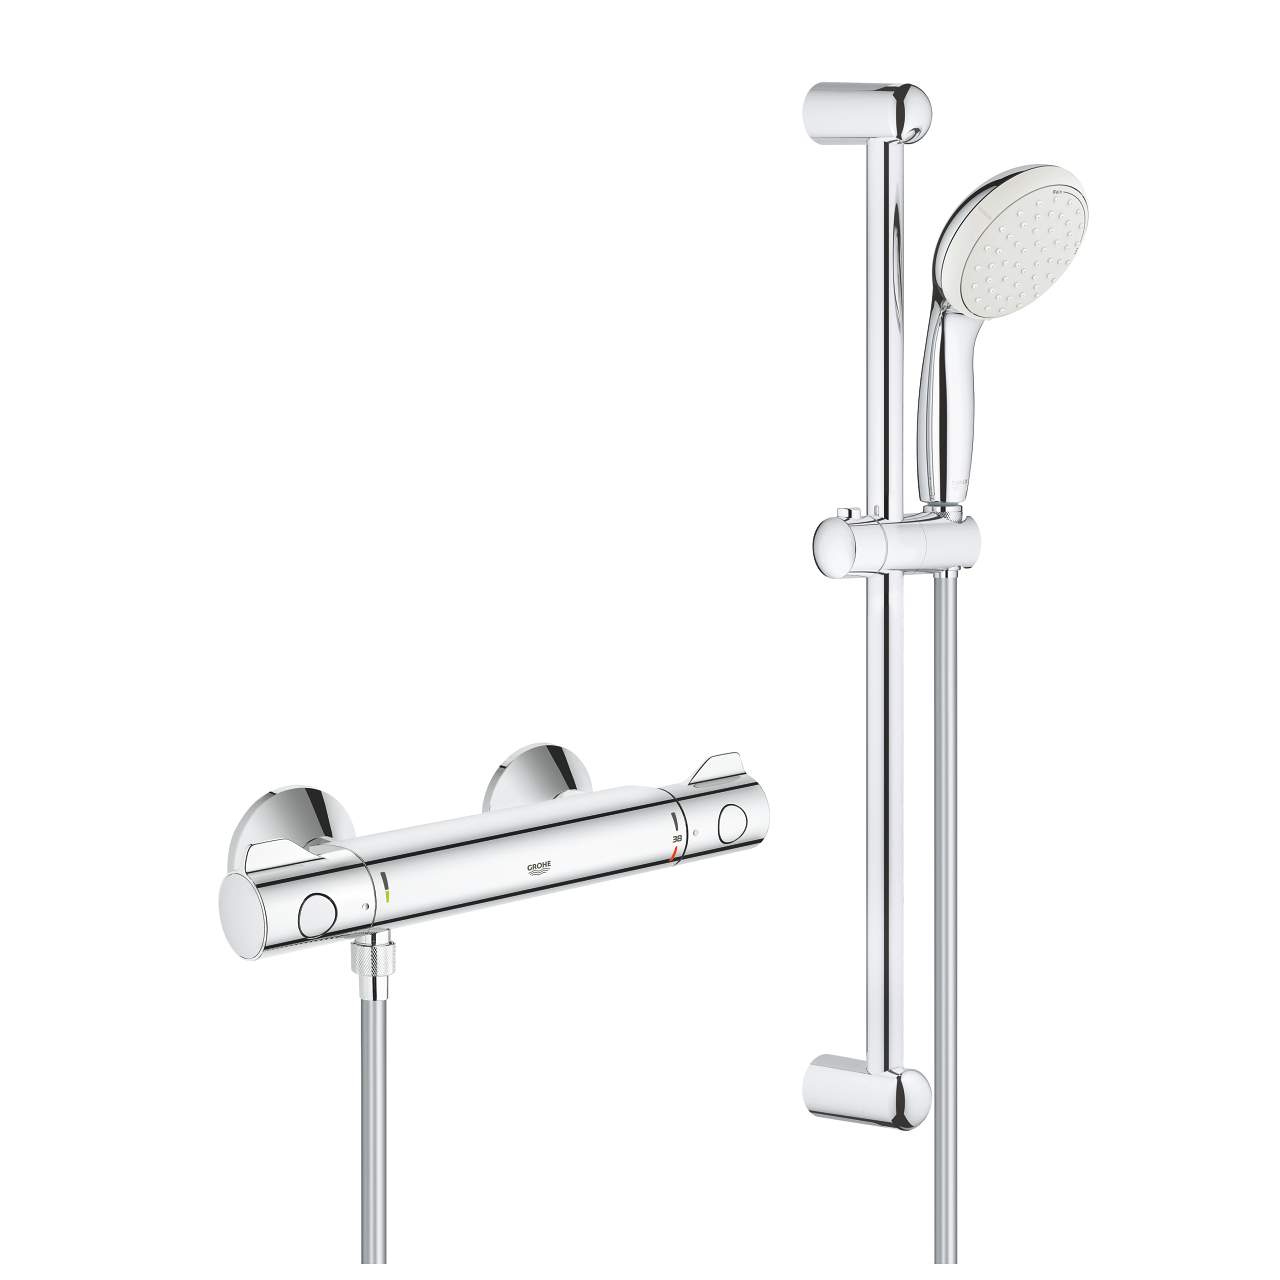 Thermostatic mixer G800 + shower set.